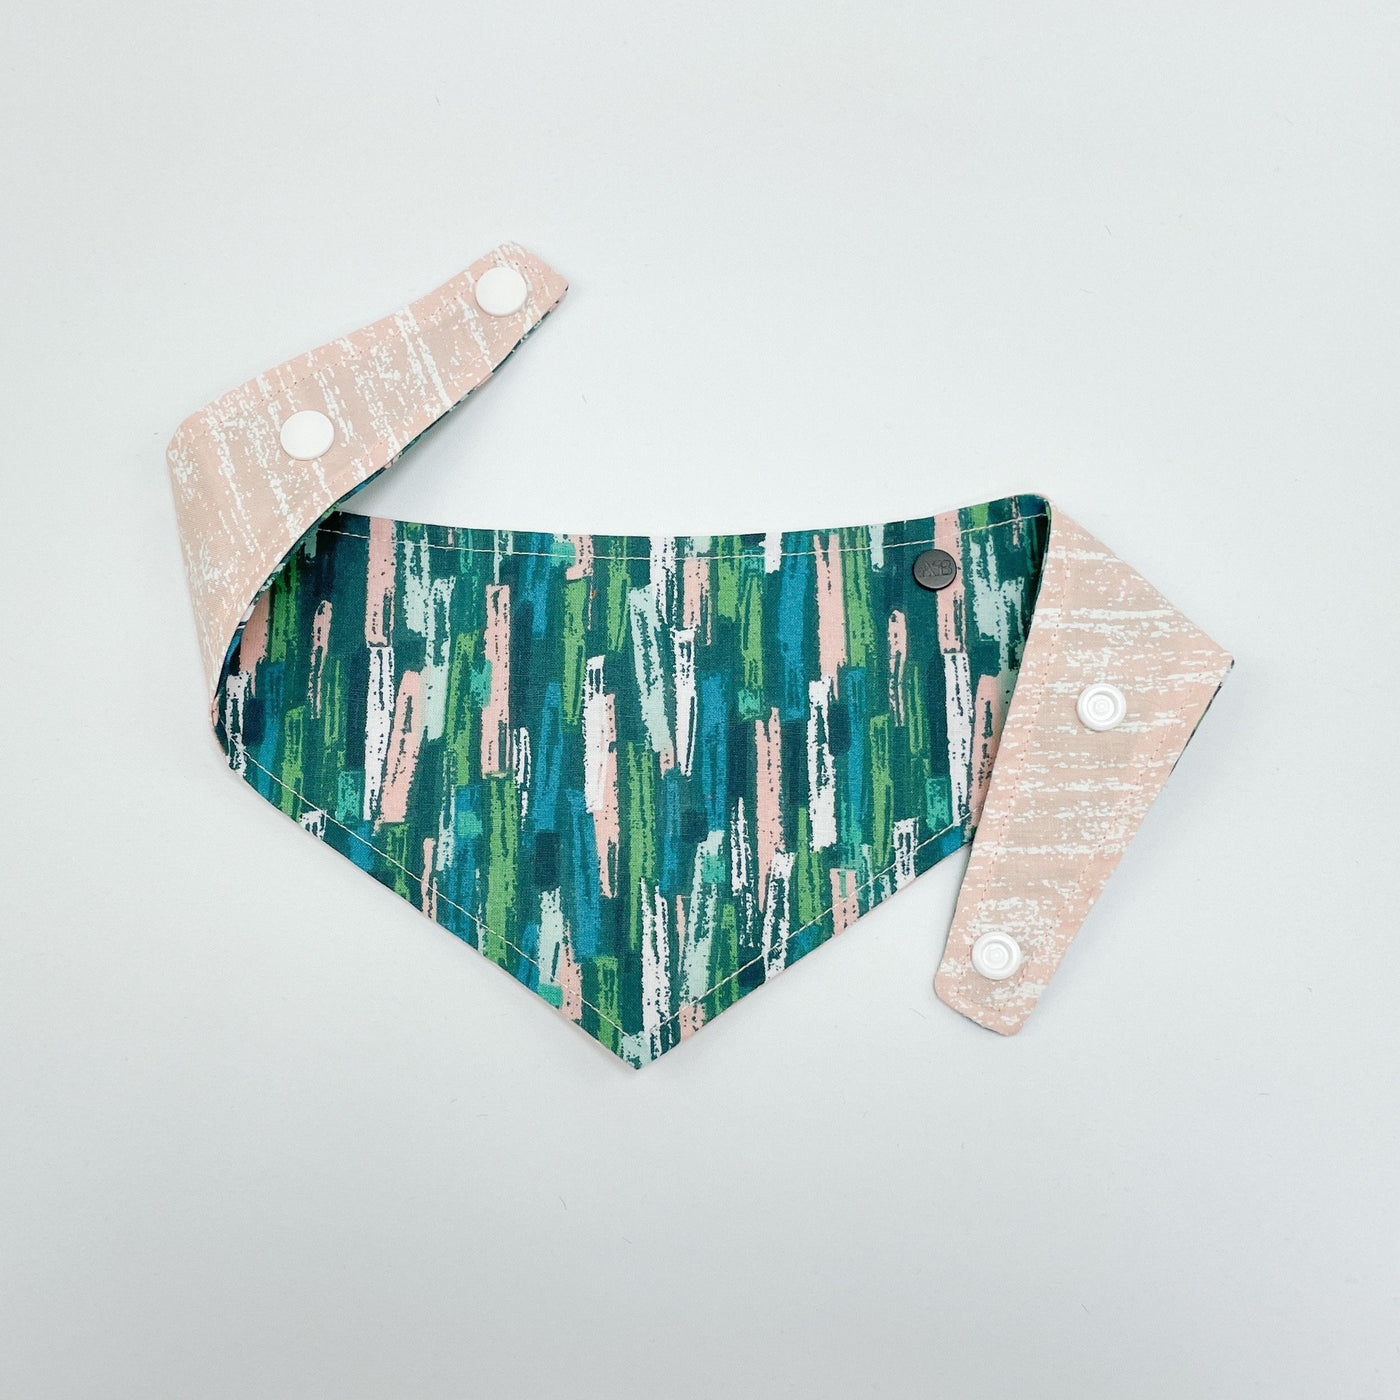 Autumn Stripe Check Dog Bandana in tones of teal, green, grey and blush pink.